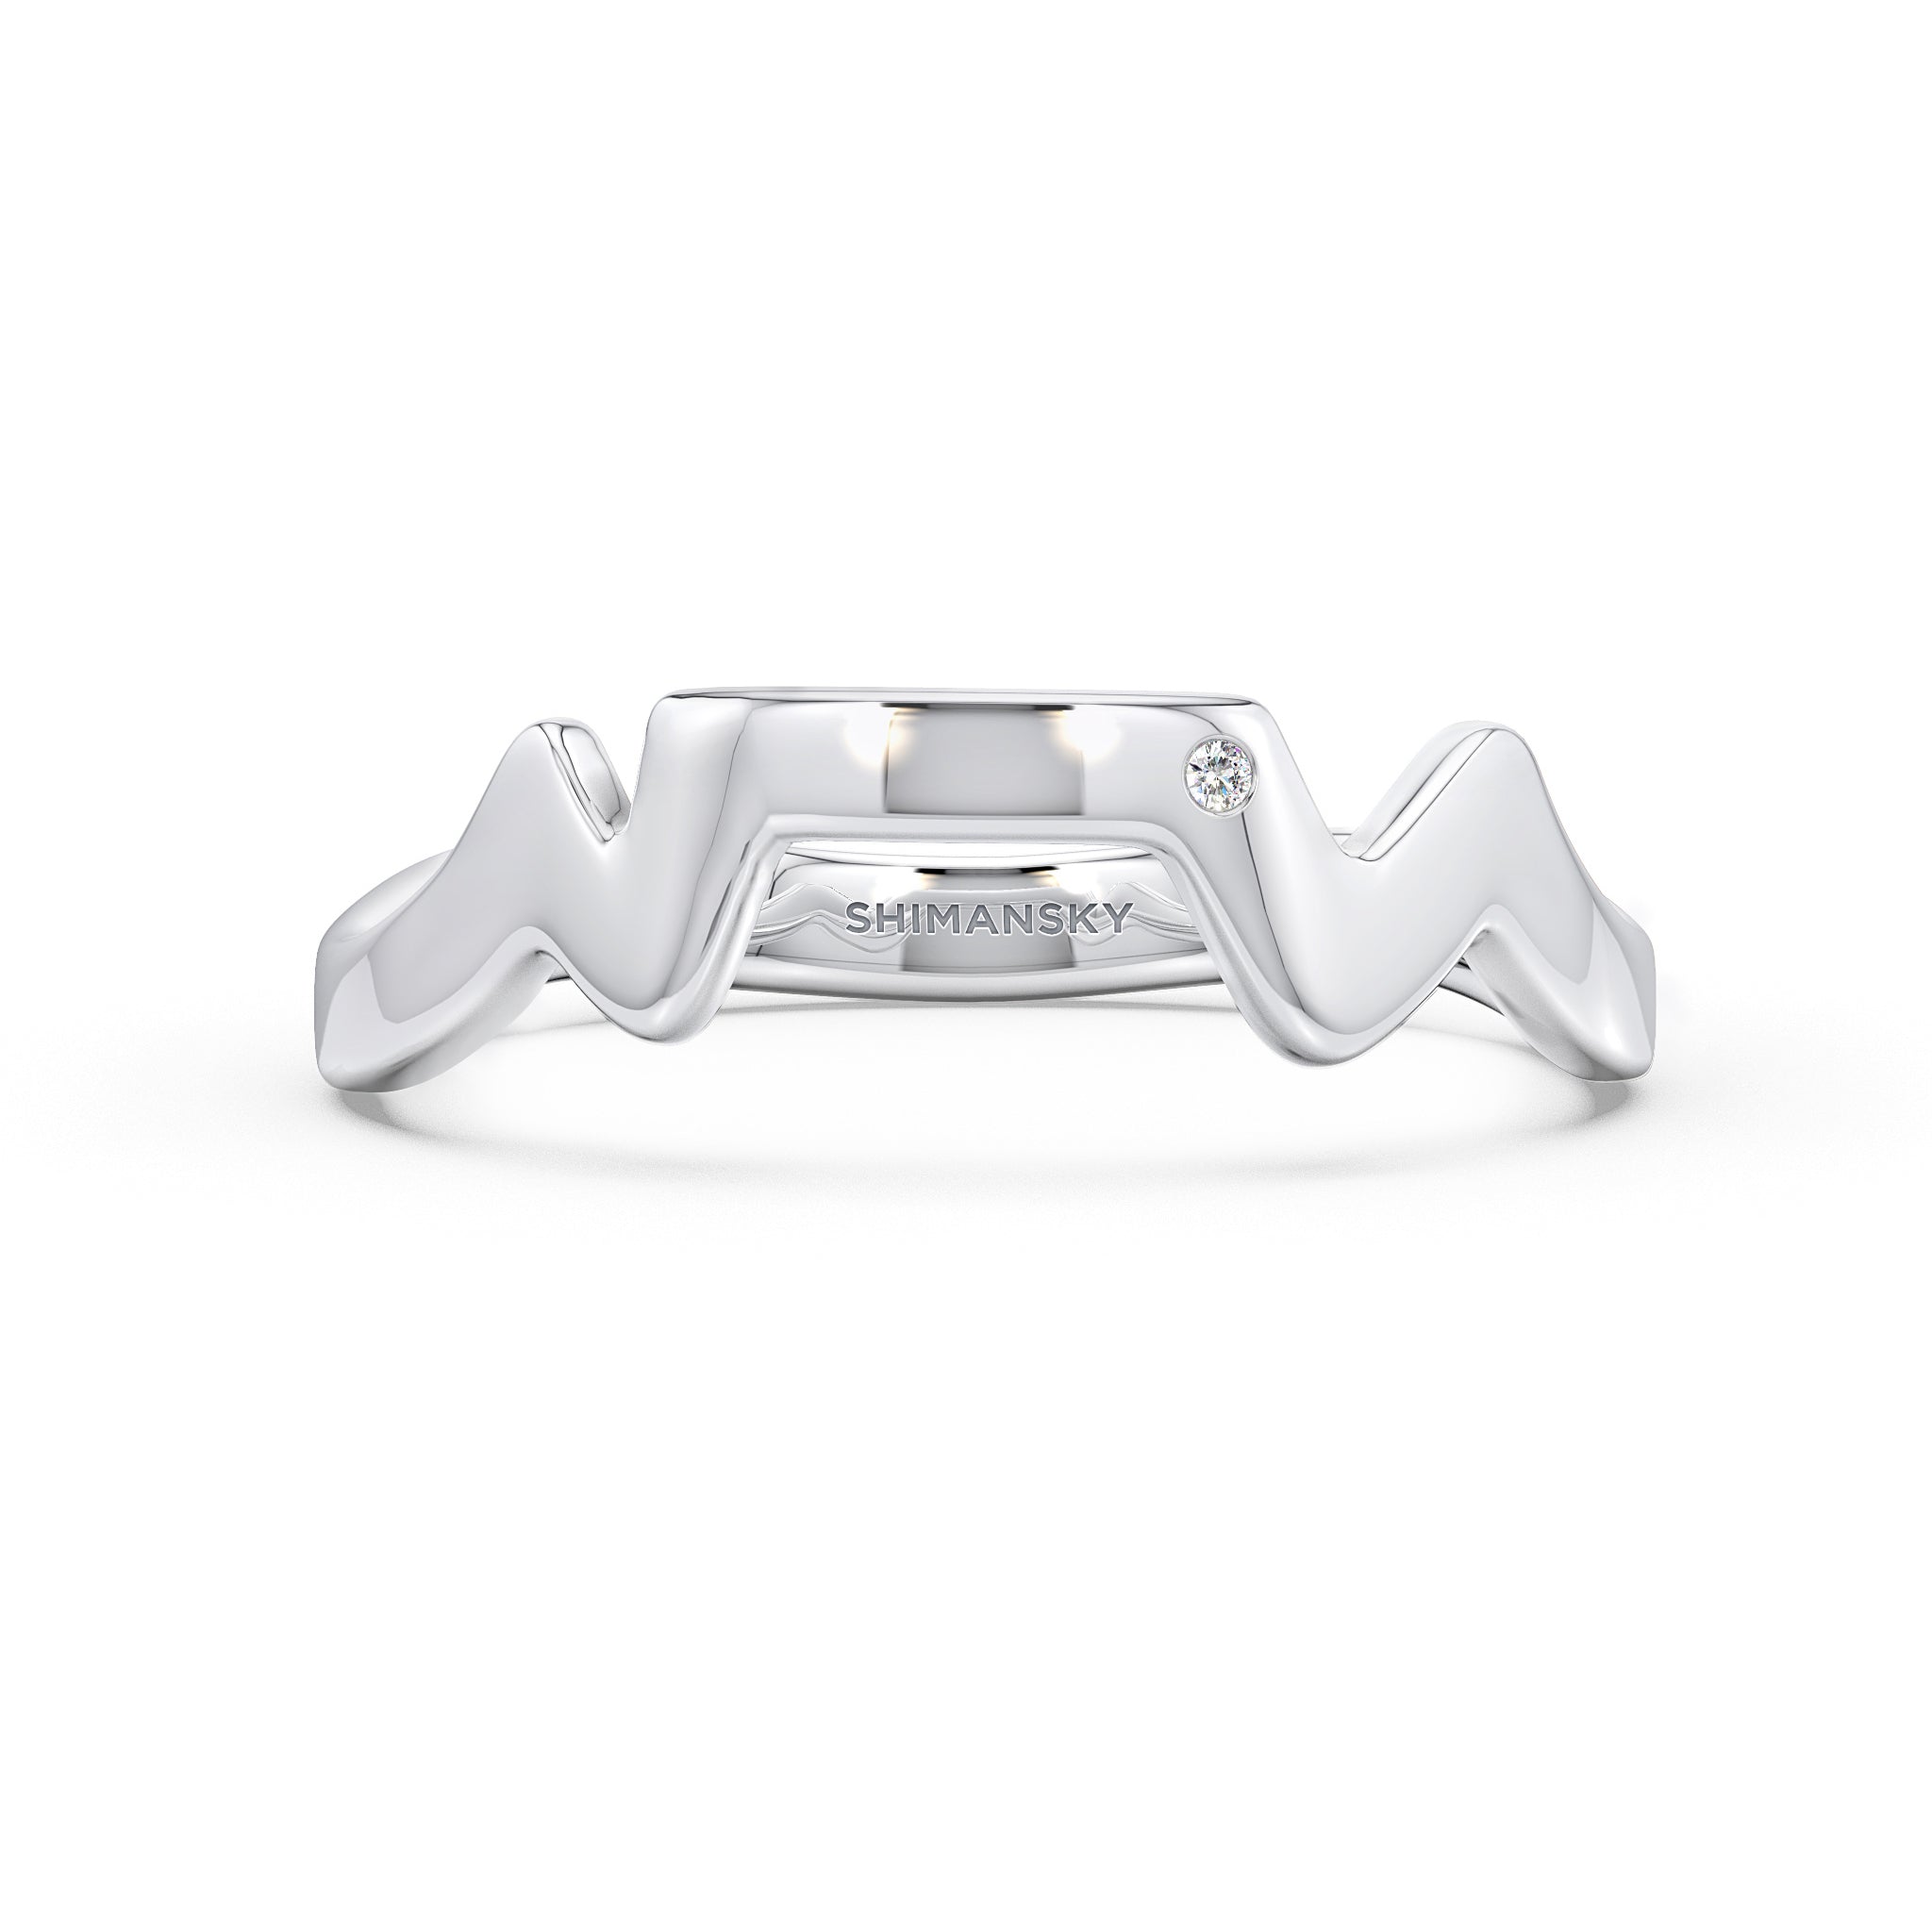 Shimansky - Table Mountain Single Diamond Ring Crafted in 14K White Gold